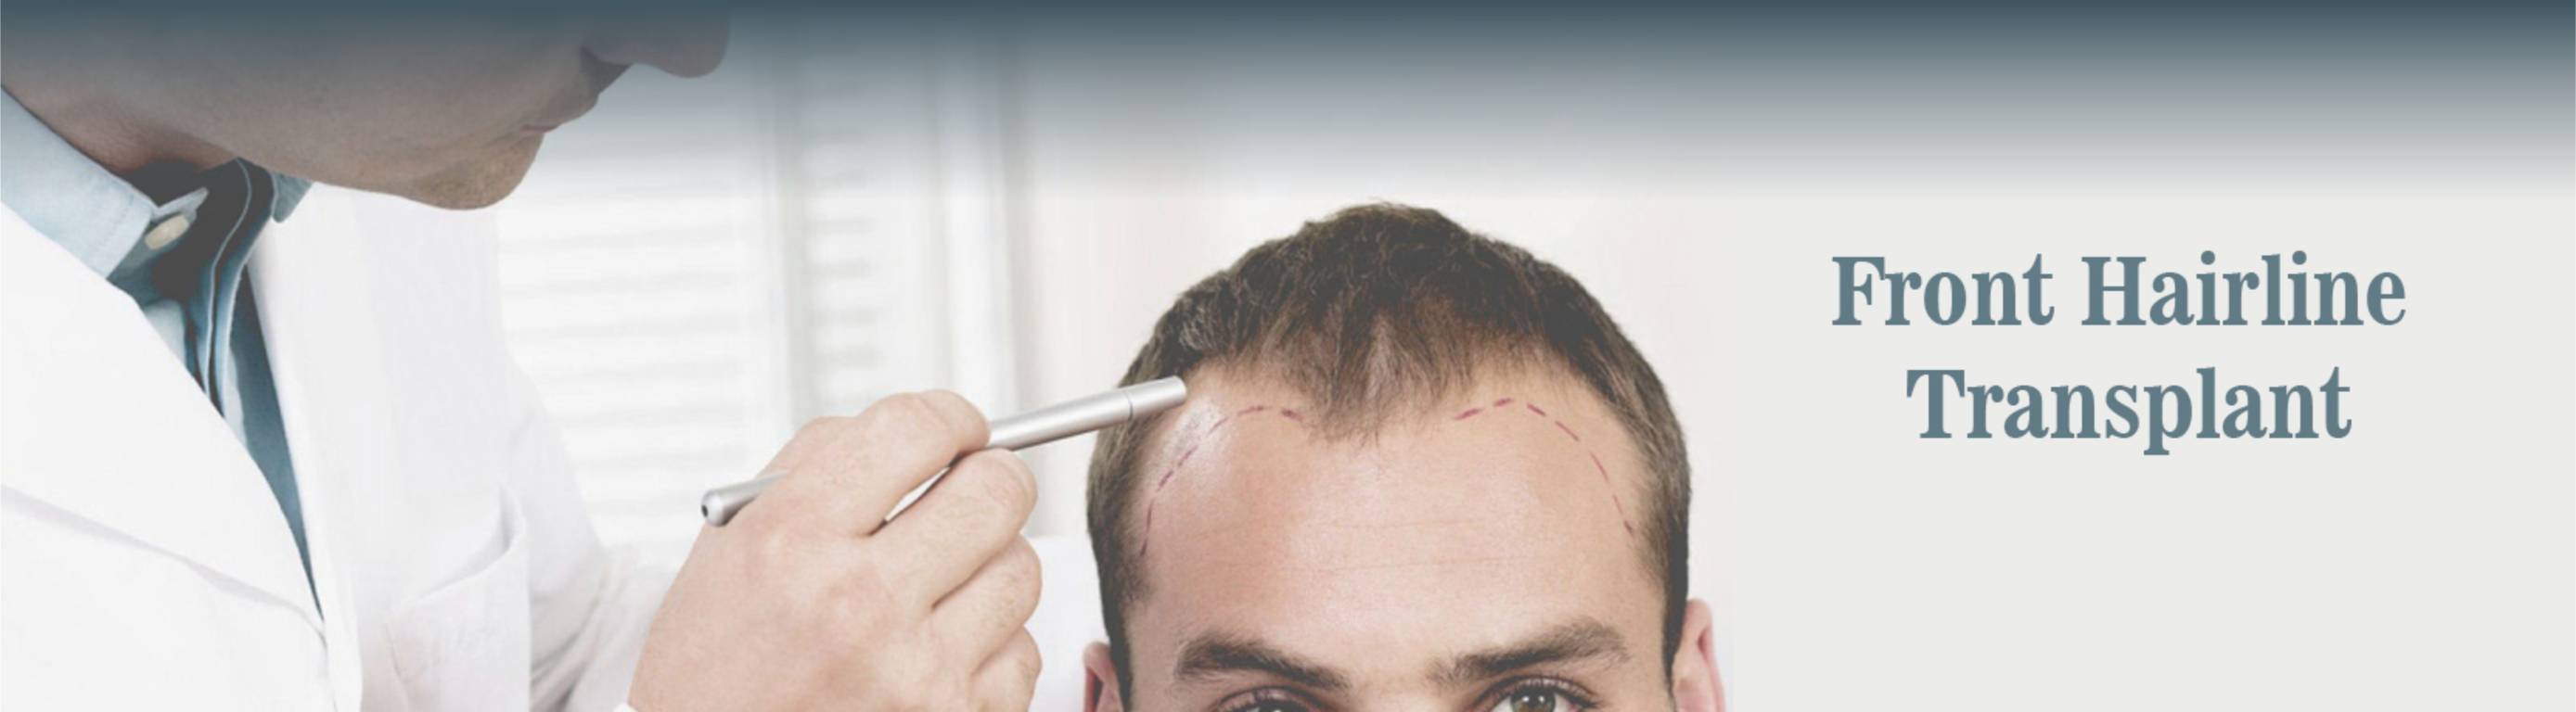 HAIR TRANSPLANT AND RESTORATION DONE AT DEZIRE CLINIC